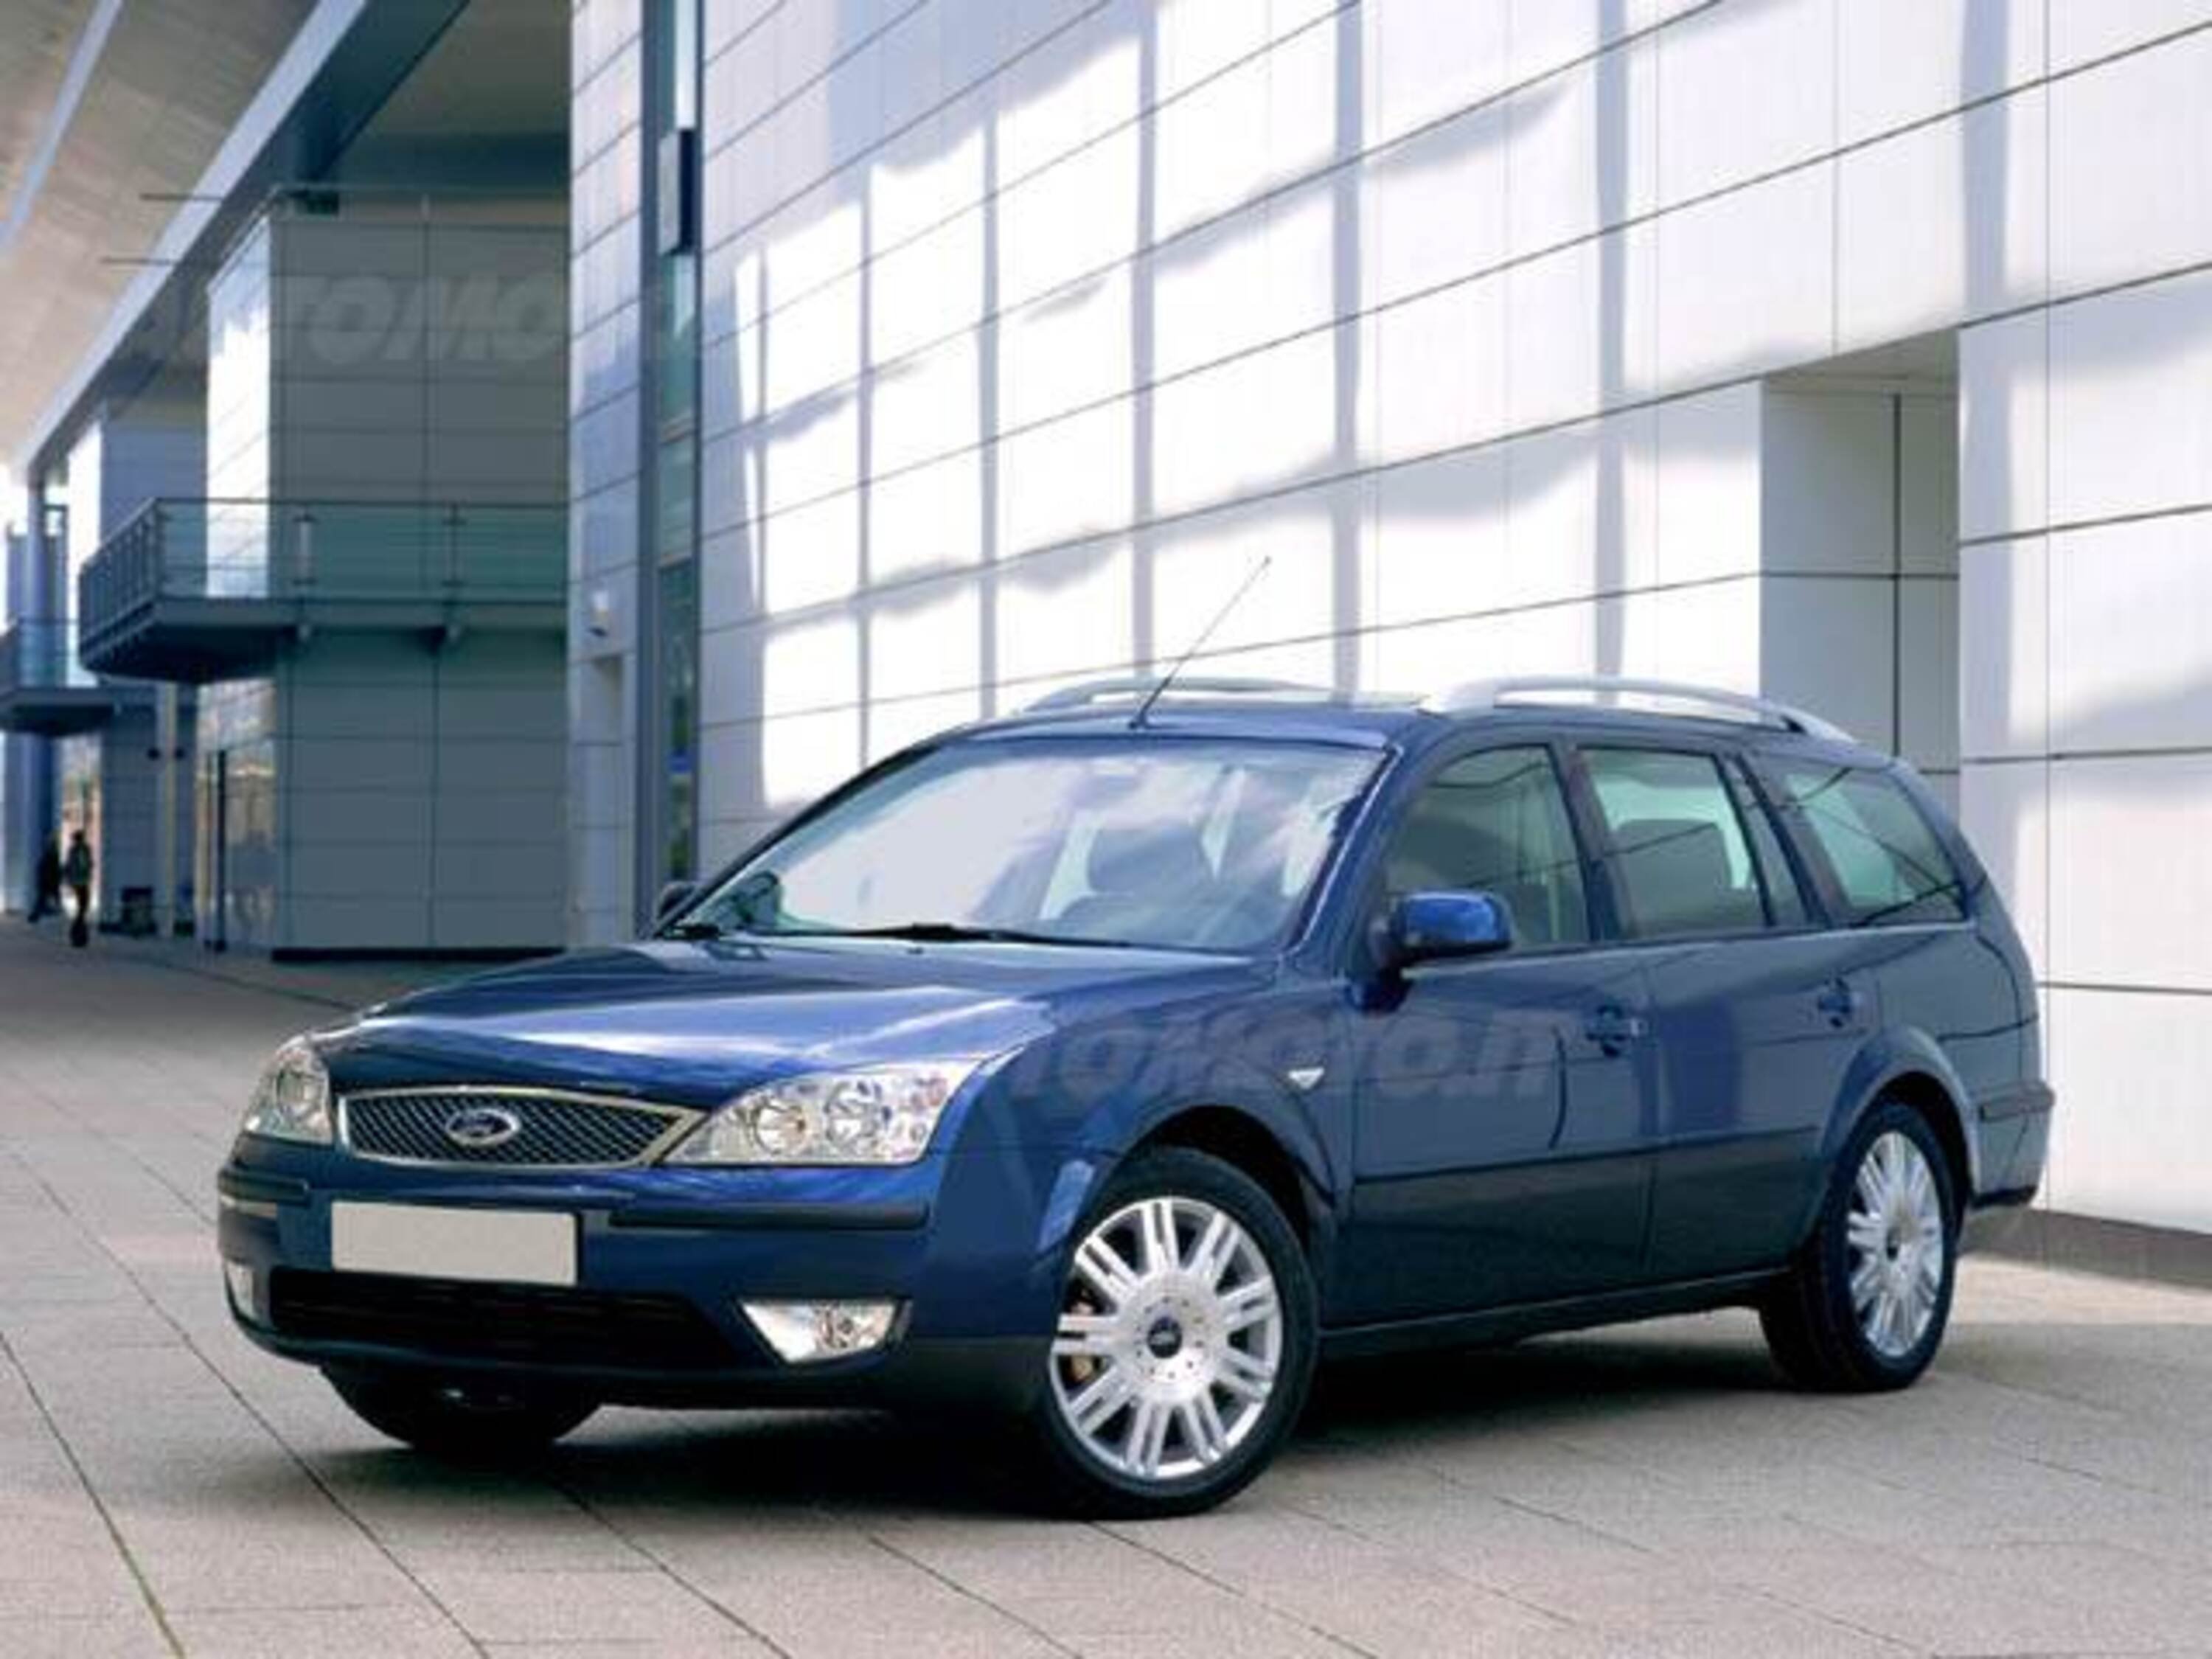 Ford Mondeo Station Wagon 1.8 SCi 16V cat SW Ghia my 05